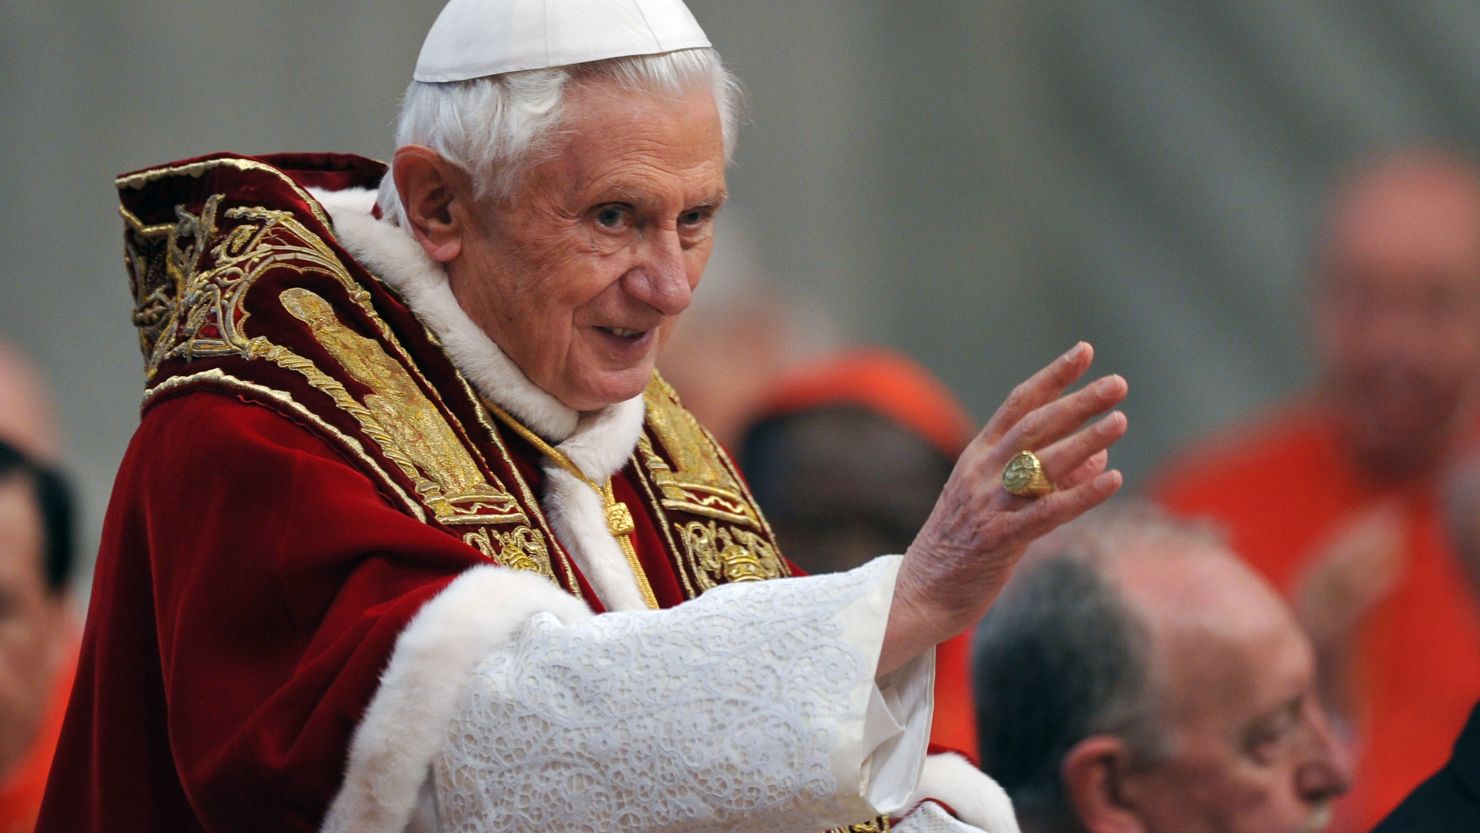 Pope Benedict XVI arrives for the Consistory where he will appoint 22 new cardinals on February 18, 2012.